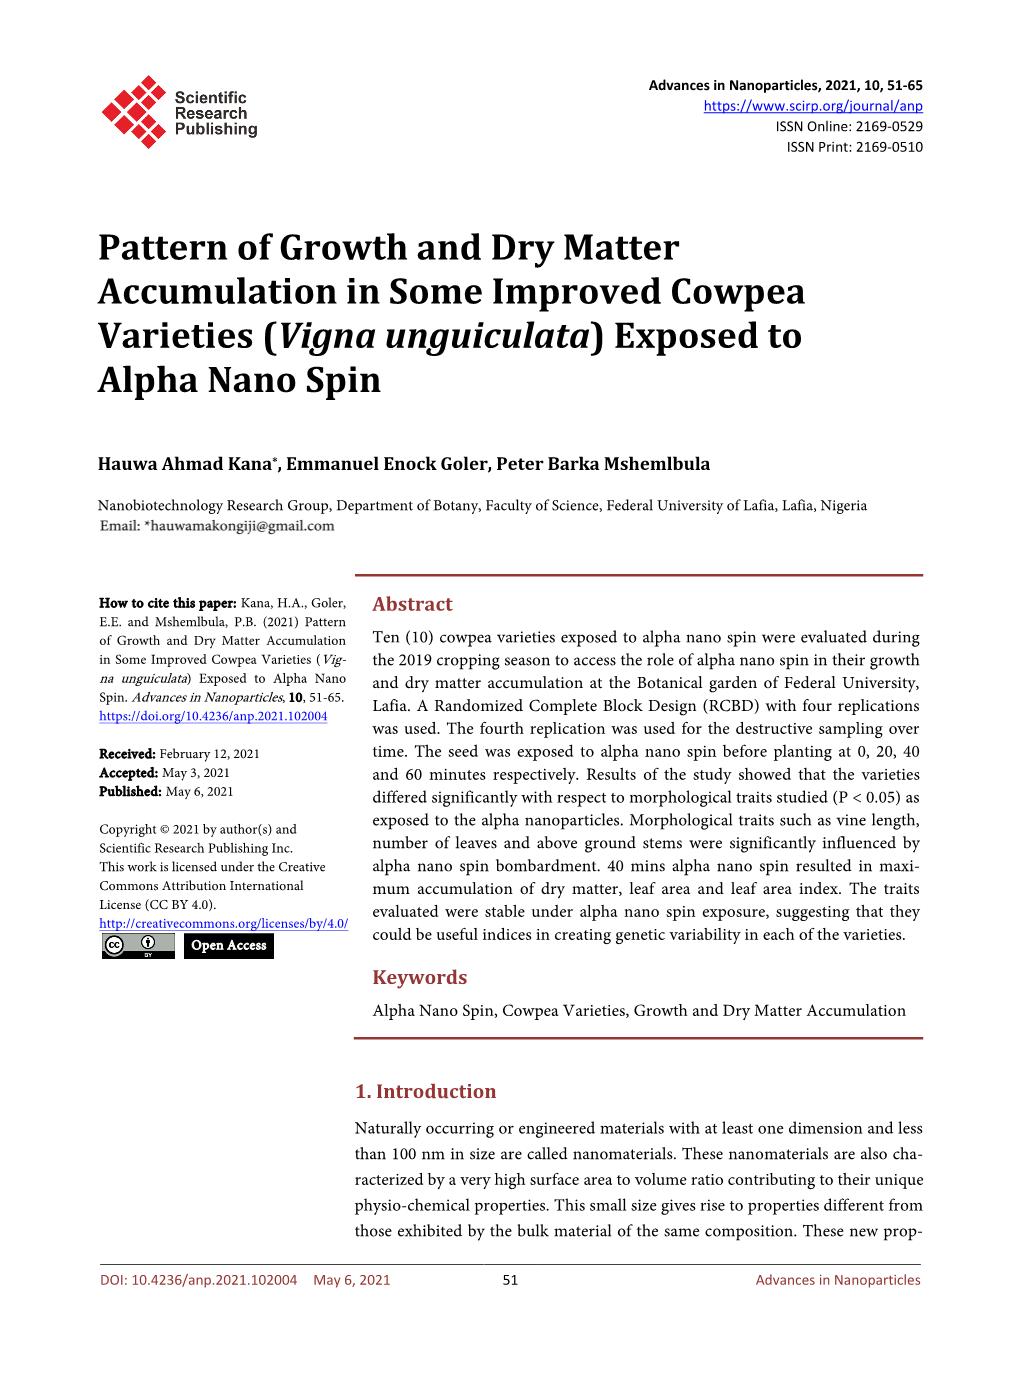 Exposed to Alpha Nano Spin